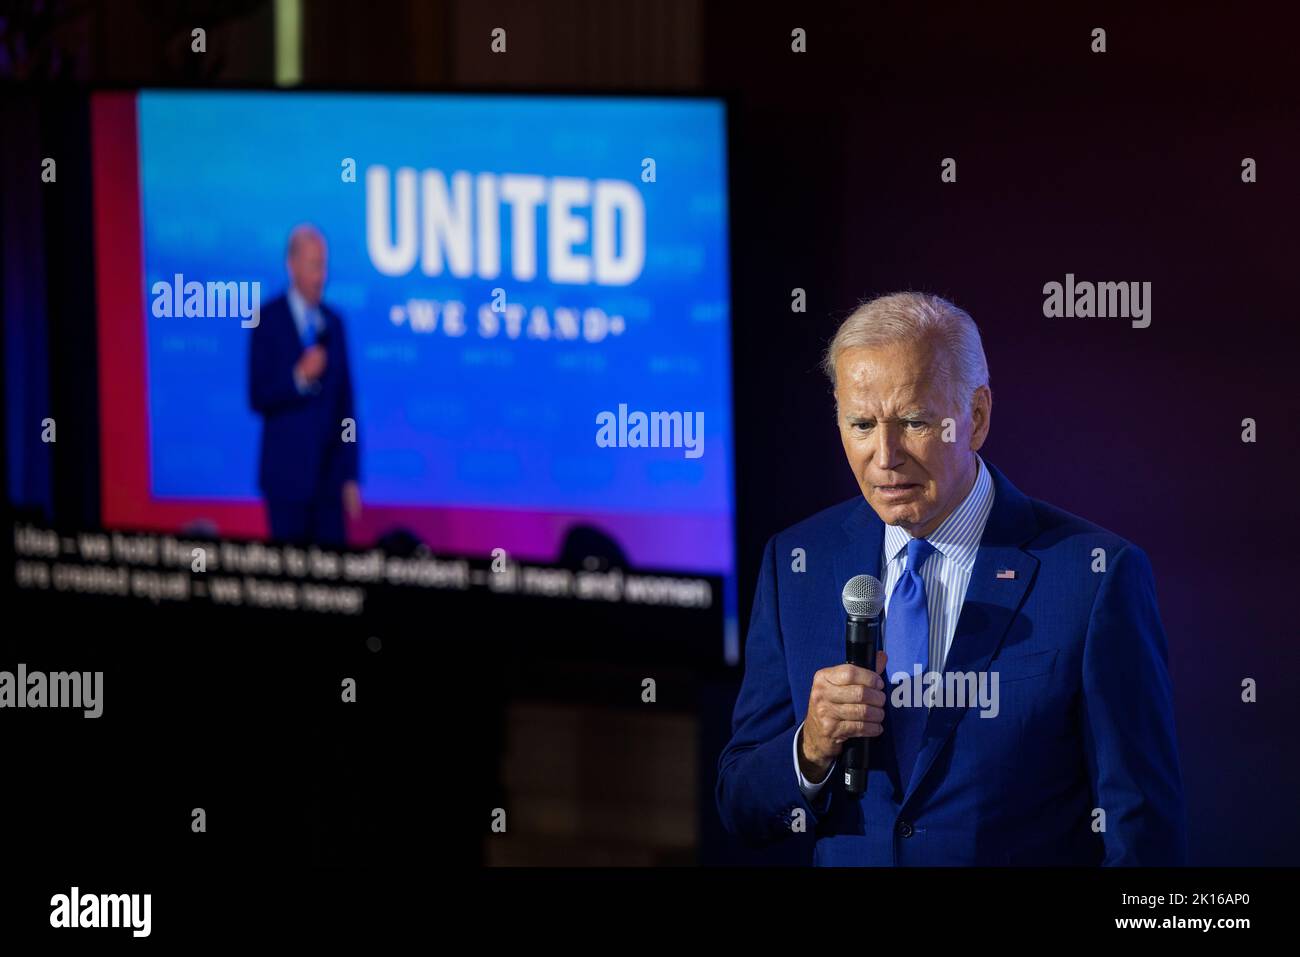 Washington DC, USA. 15th Sep, 2022. United States President Joe Biden makes remarks at the United We Stand Summit in the East Room of the White House in Washington, DC, USA, 15 September 2022.Credit: Jim LoScalzo/Pool via CNP Photo via Credit: Newscom/Alamy Live News Stock Photo